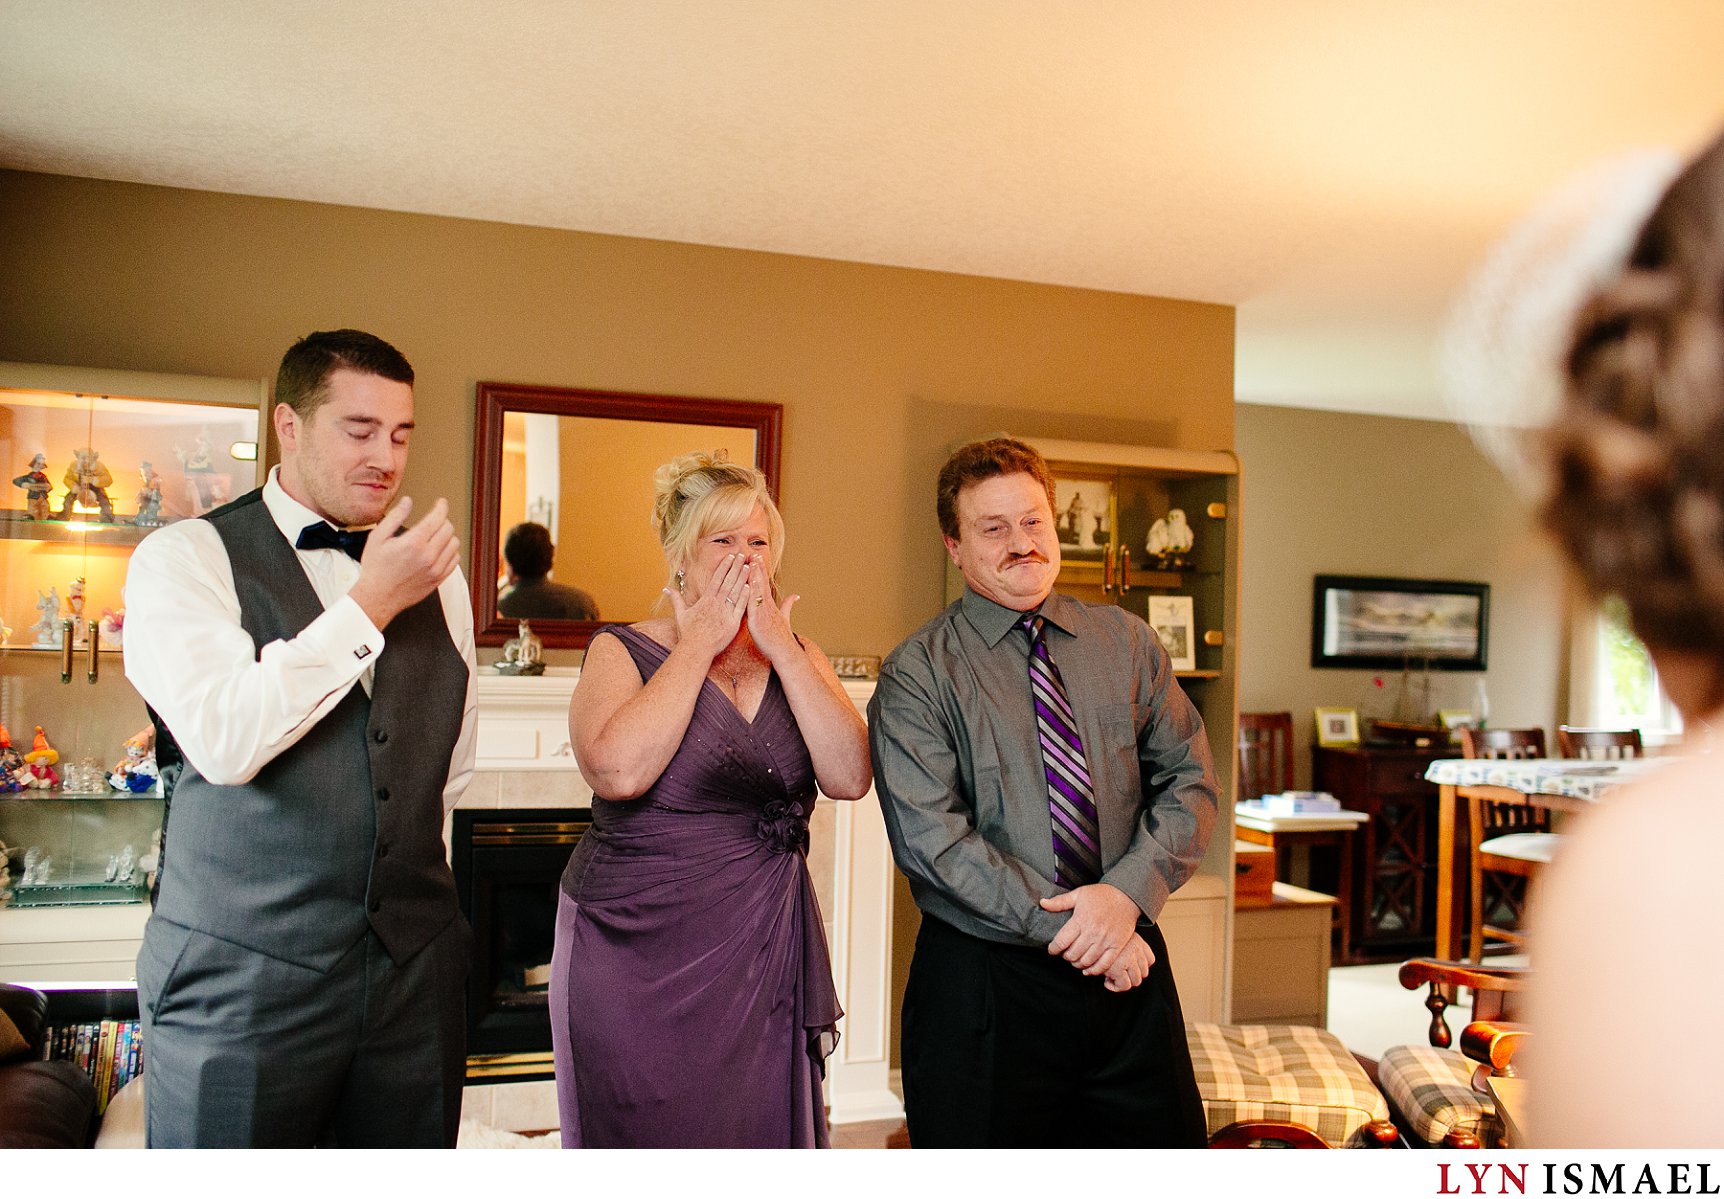 An emotional reaction from the bride's family upon seeing the bride for the first time.